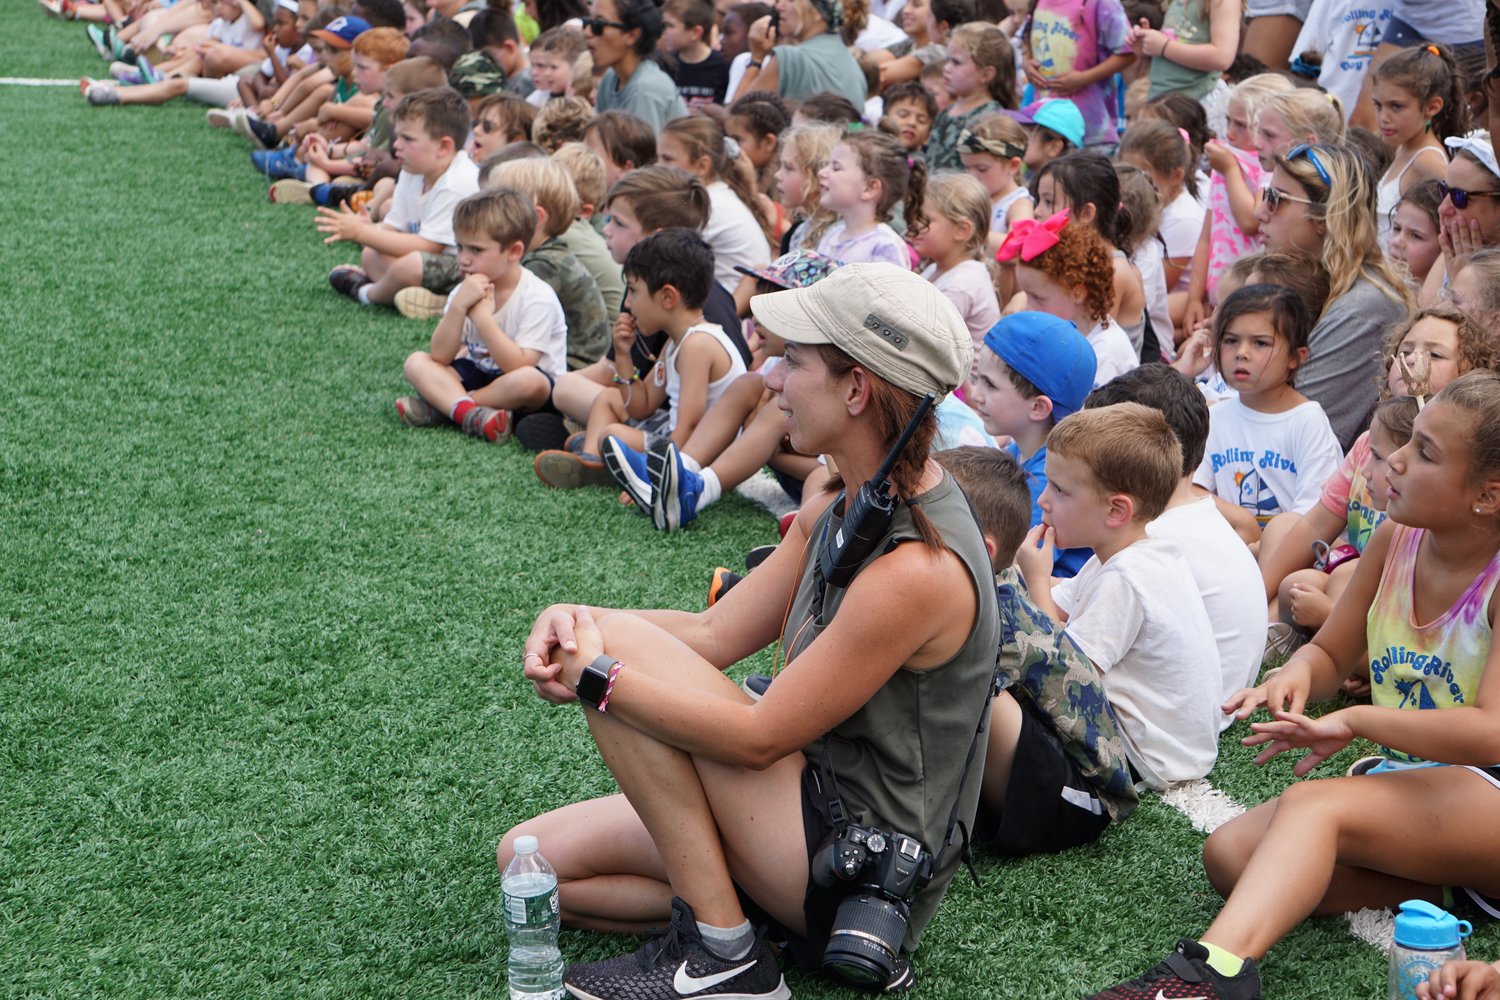 Jennifer Glatzer, communications manager at Rolling River Day Camp, sitting, center front, with the campers, as they waited to be dismissed to their next activity.